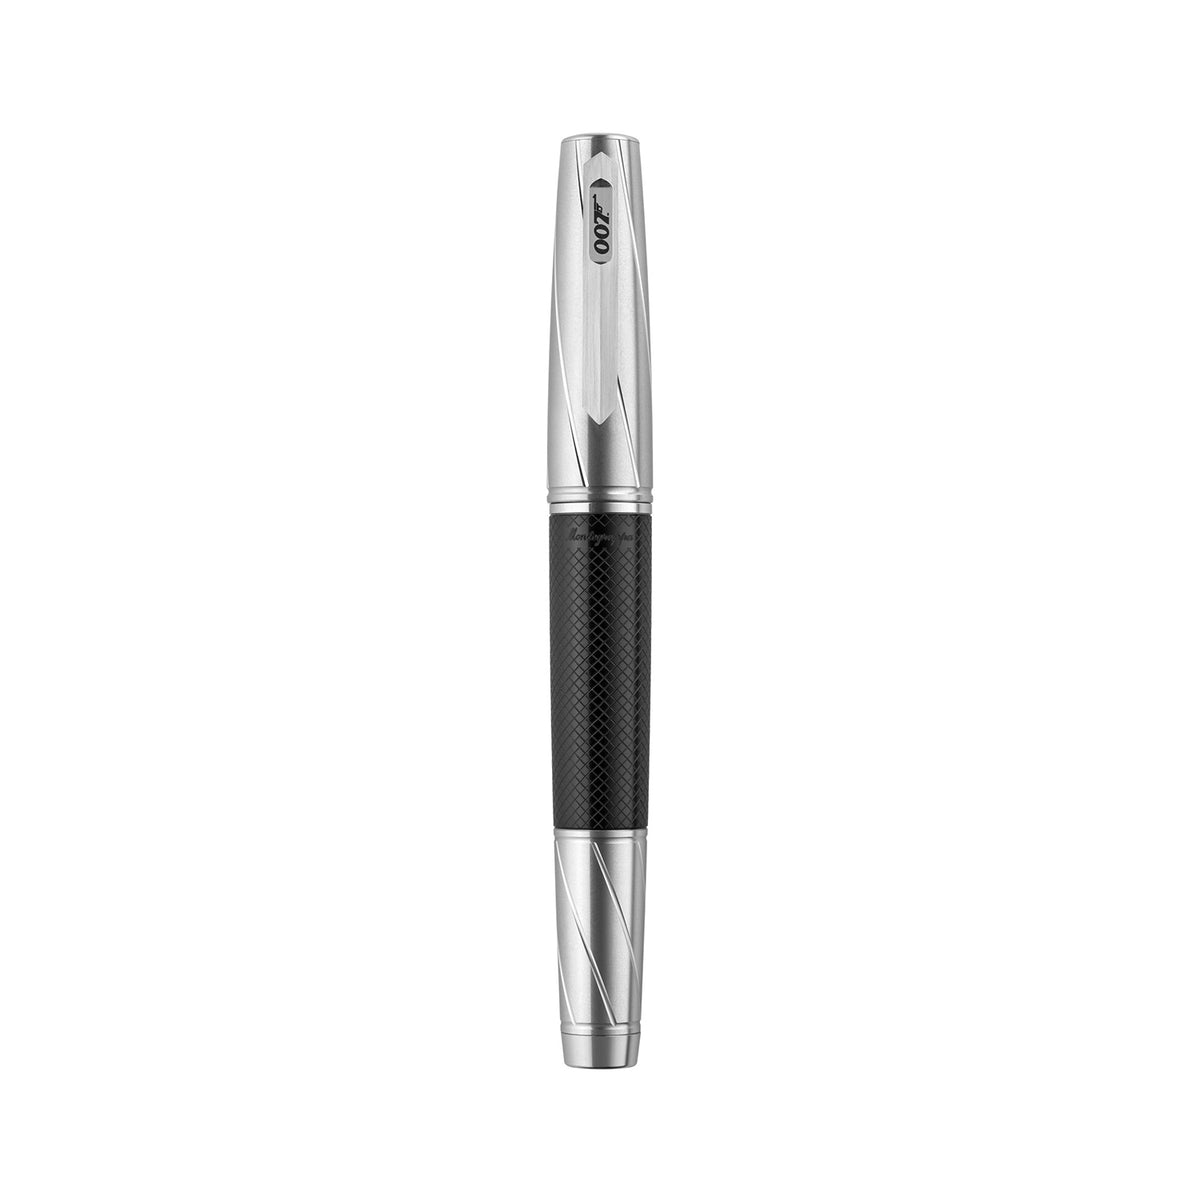 James Bond 007 Spymaster Duo Rollerball Pen - Numbered Edition - By Montegrappa